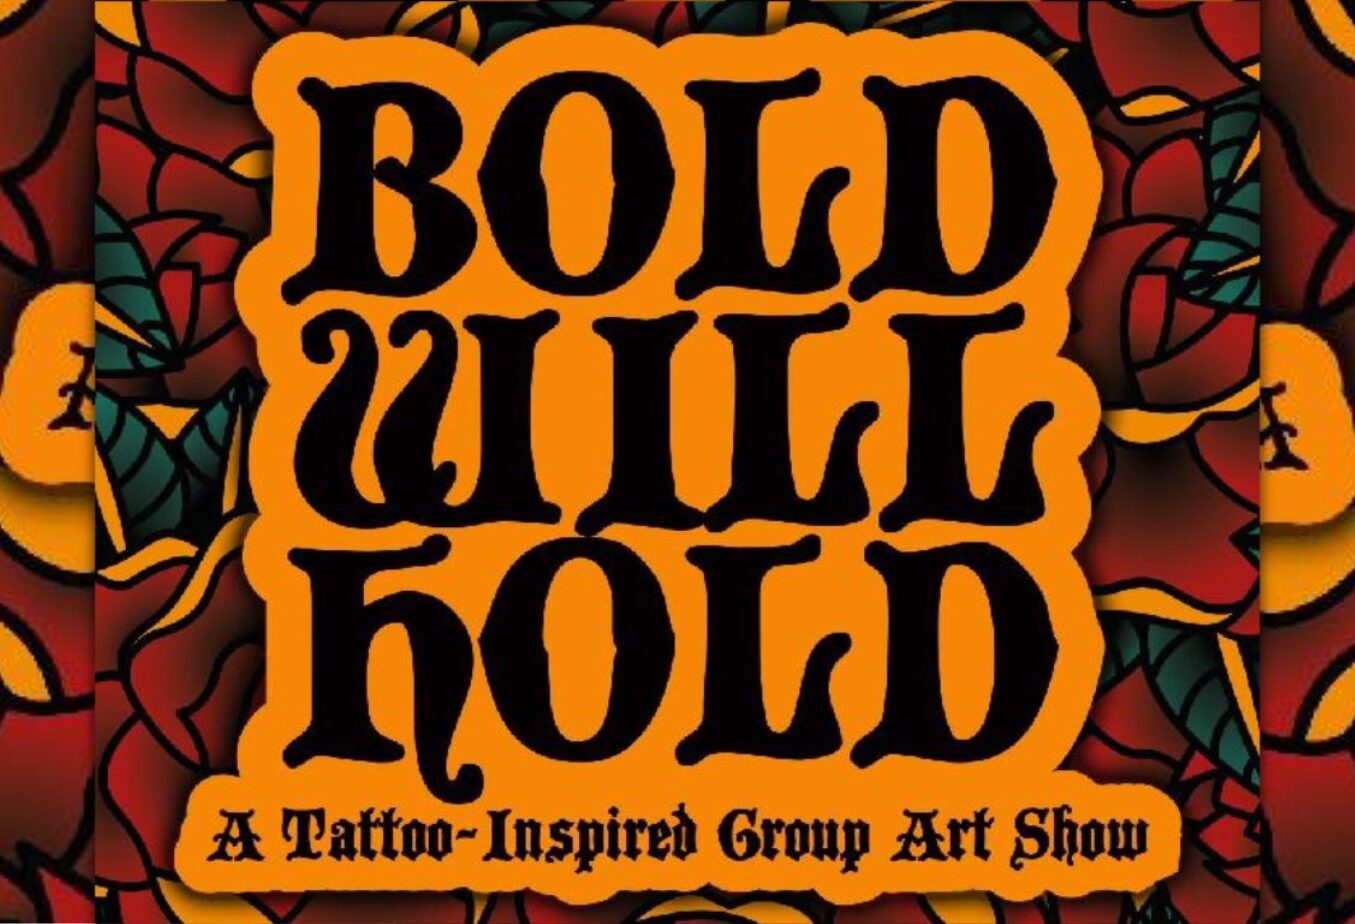 Bold Will Hold Reception Coming to Artworks on November 4th